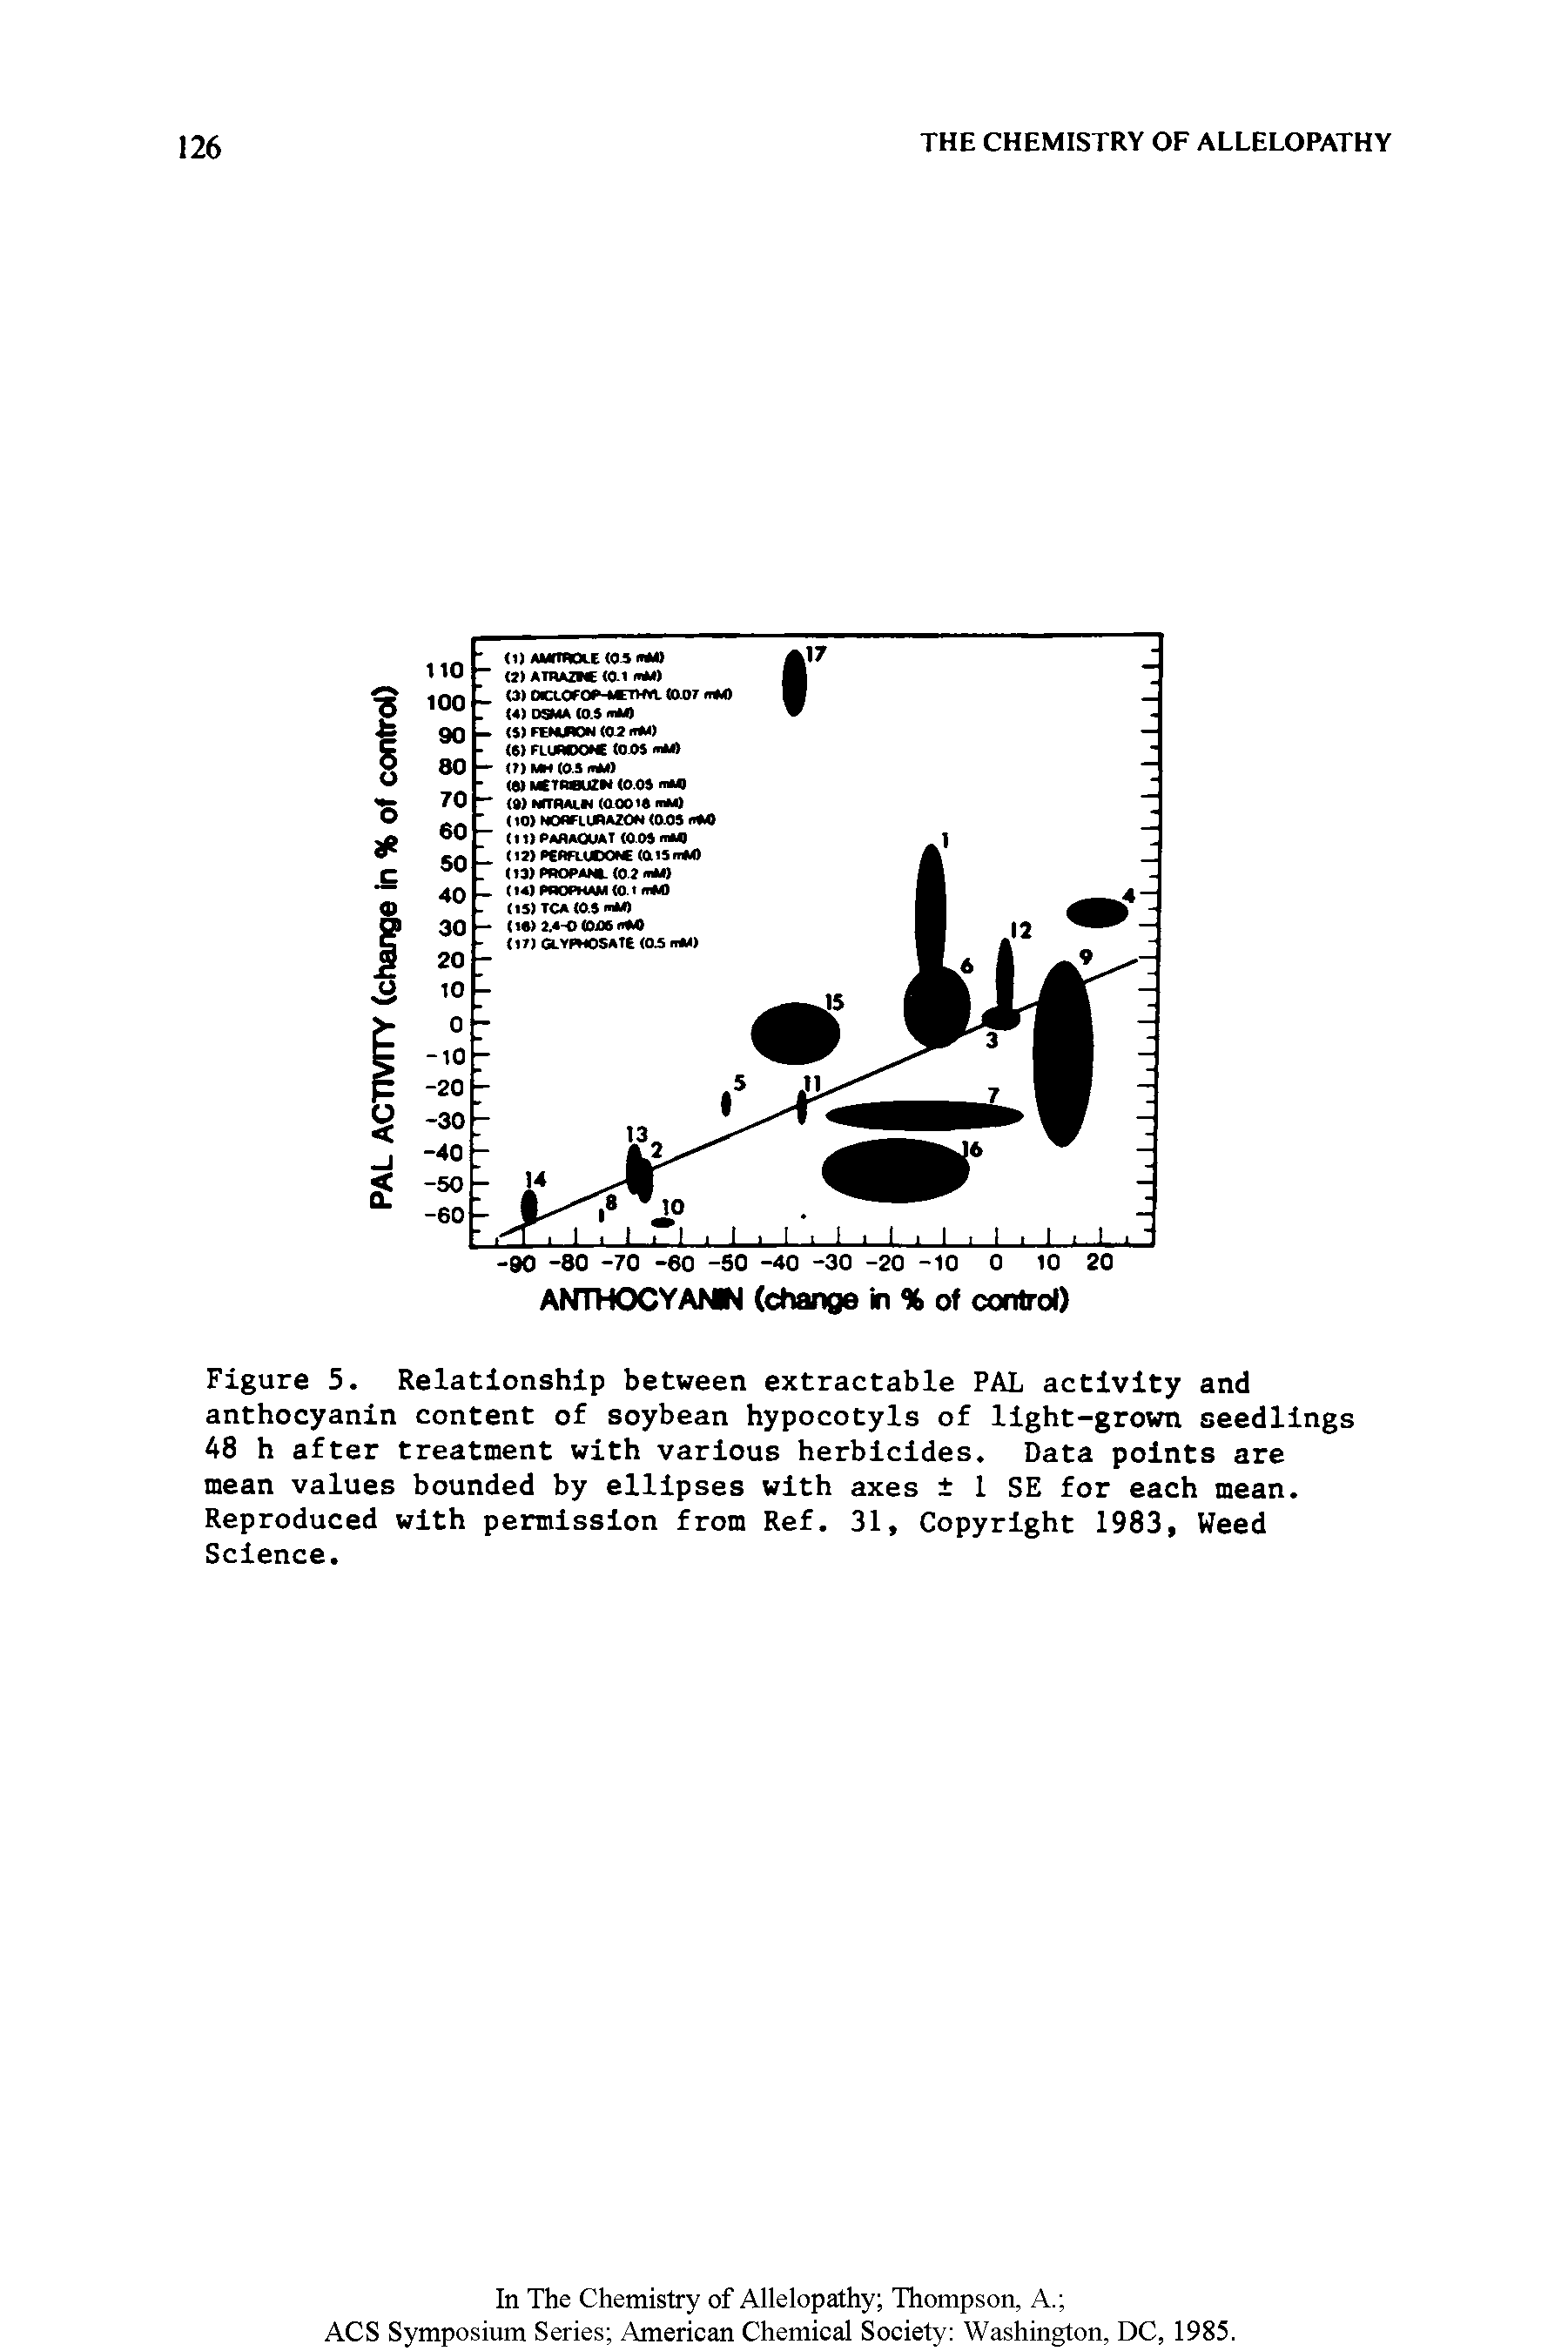 Figure 5. Relationship between extractable PAL activity and anthocyanin content of soybean hypocotyls of light-grown seedlings 48 h after treatment with various herbicides. Data points are mean values bounded by ellipses with axes 1 SE for each mean. Reproduced with permission from Ref. 31, Copyright 1983, Weed Science.